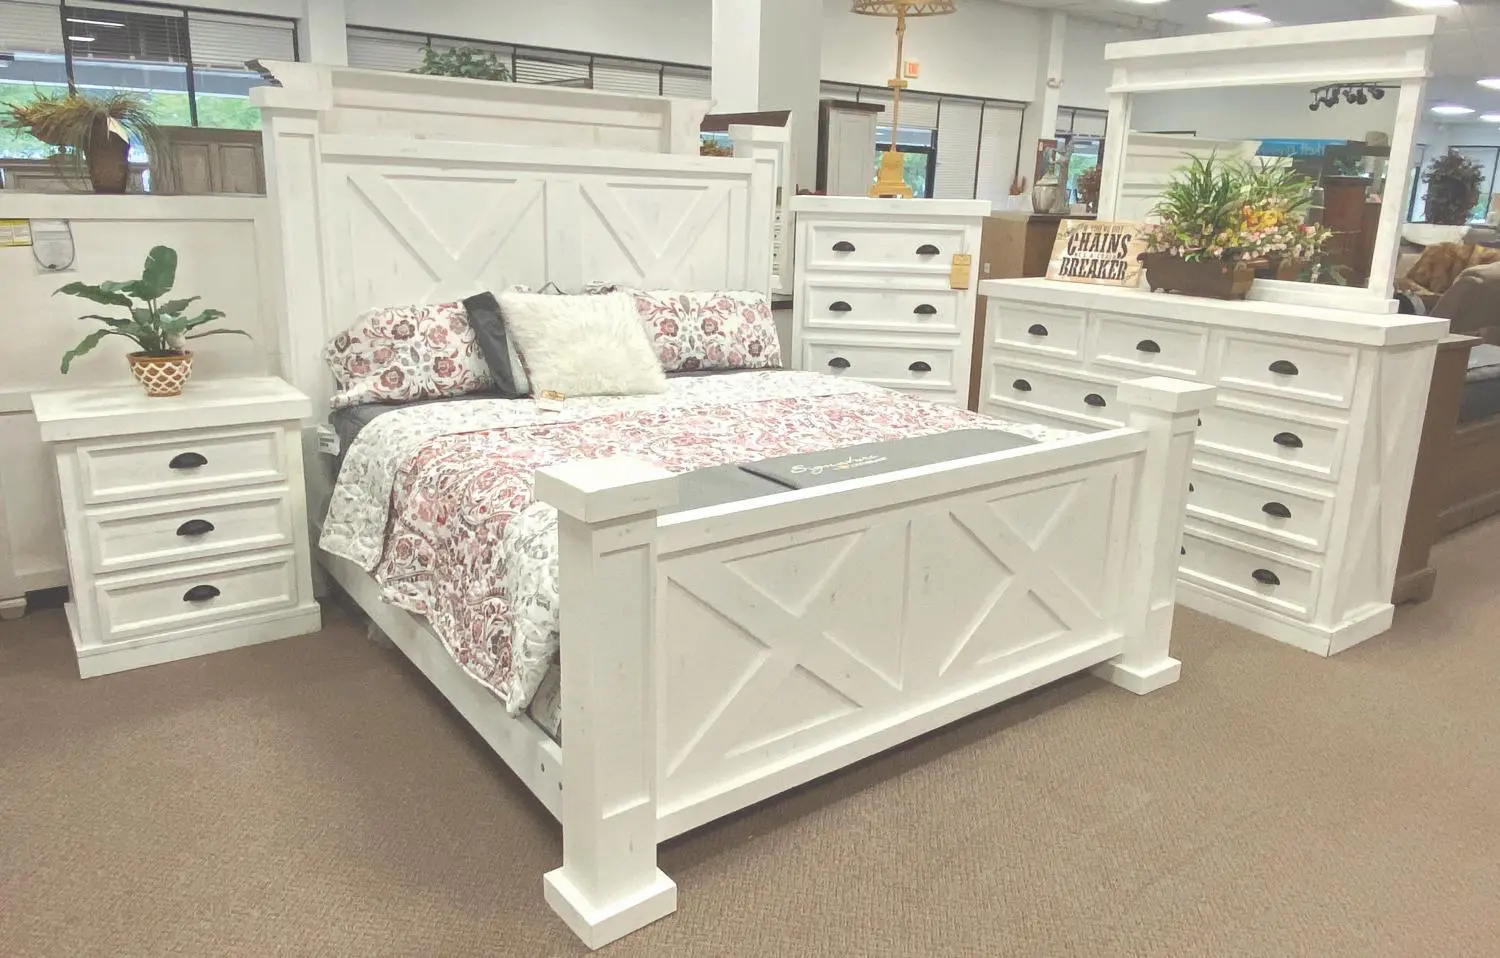 A white bed with floral bedding and dresser.